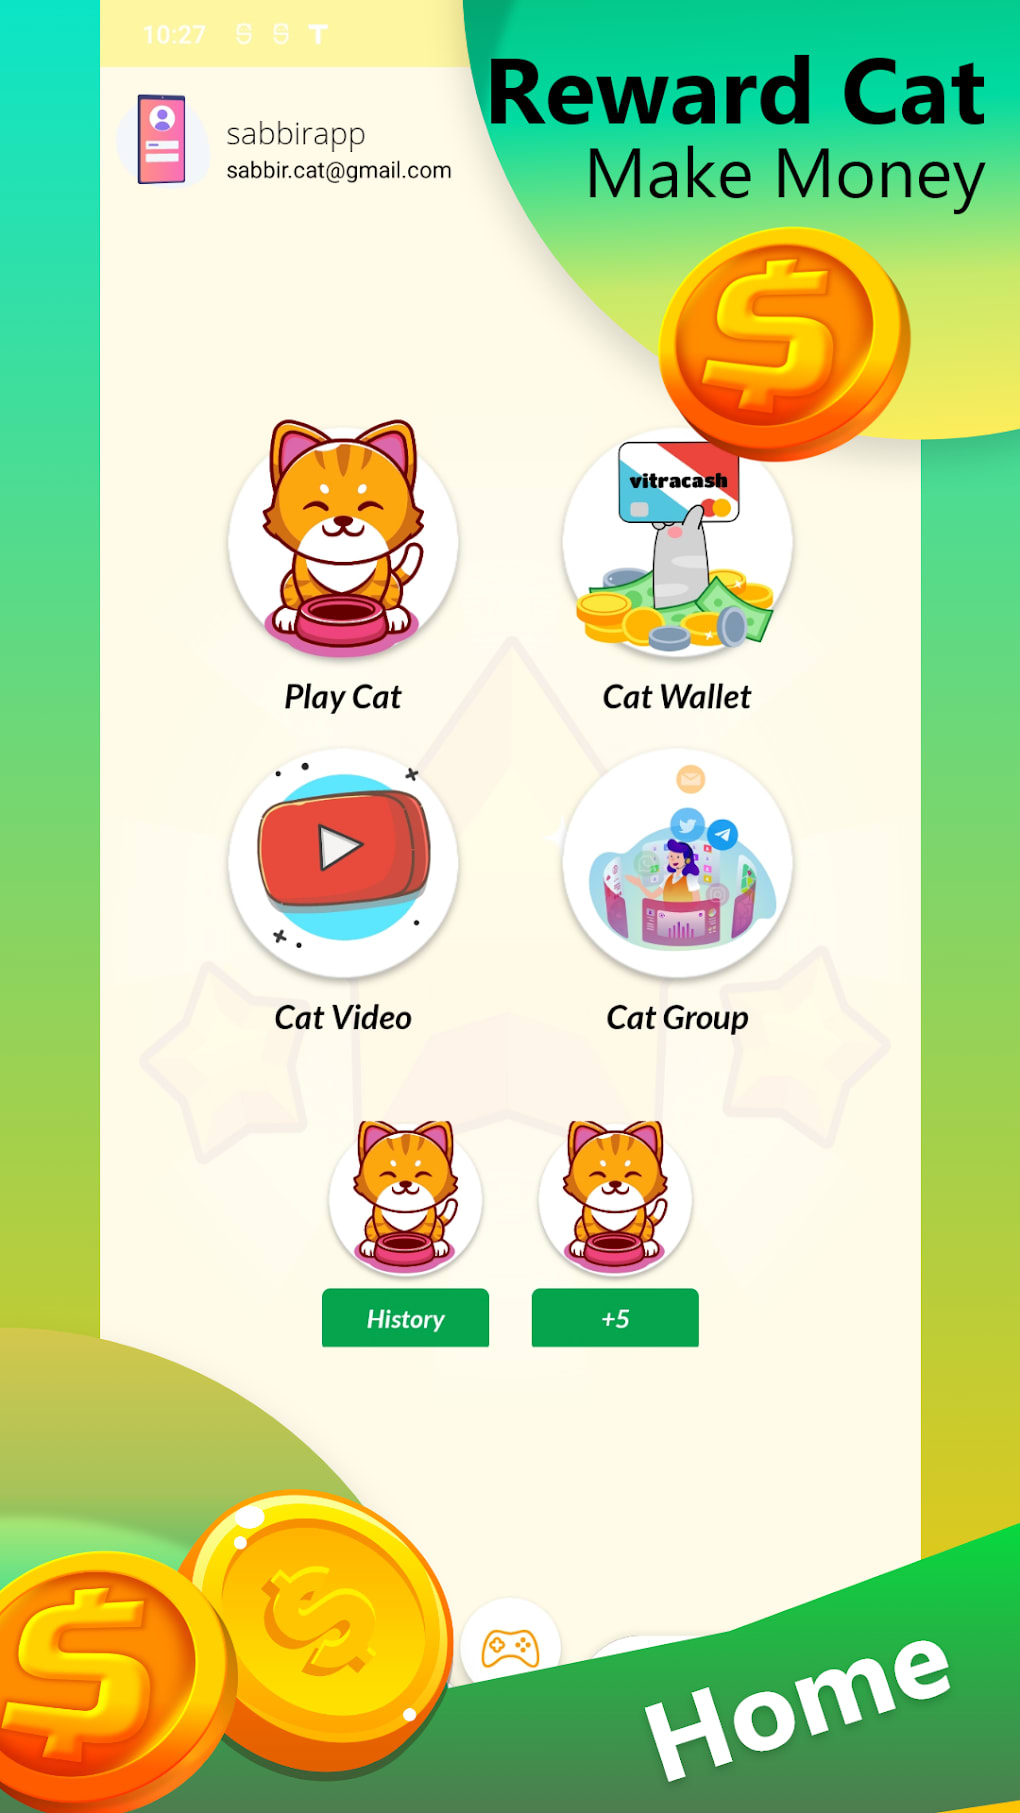 What is cat app for money earning?